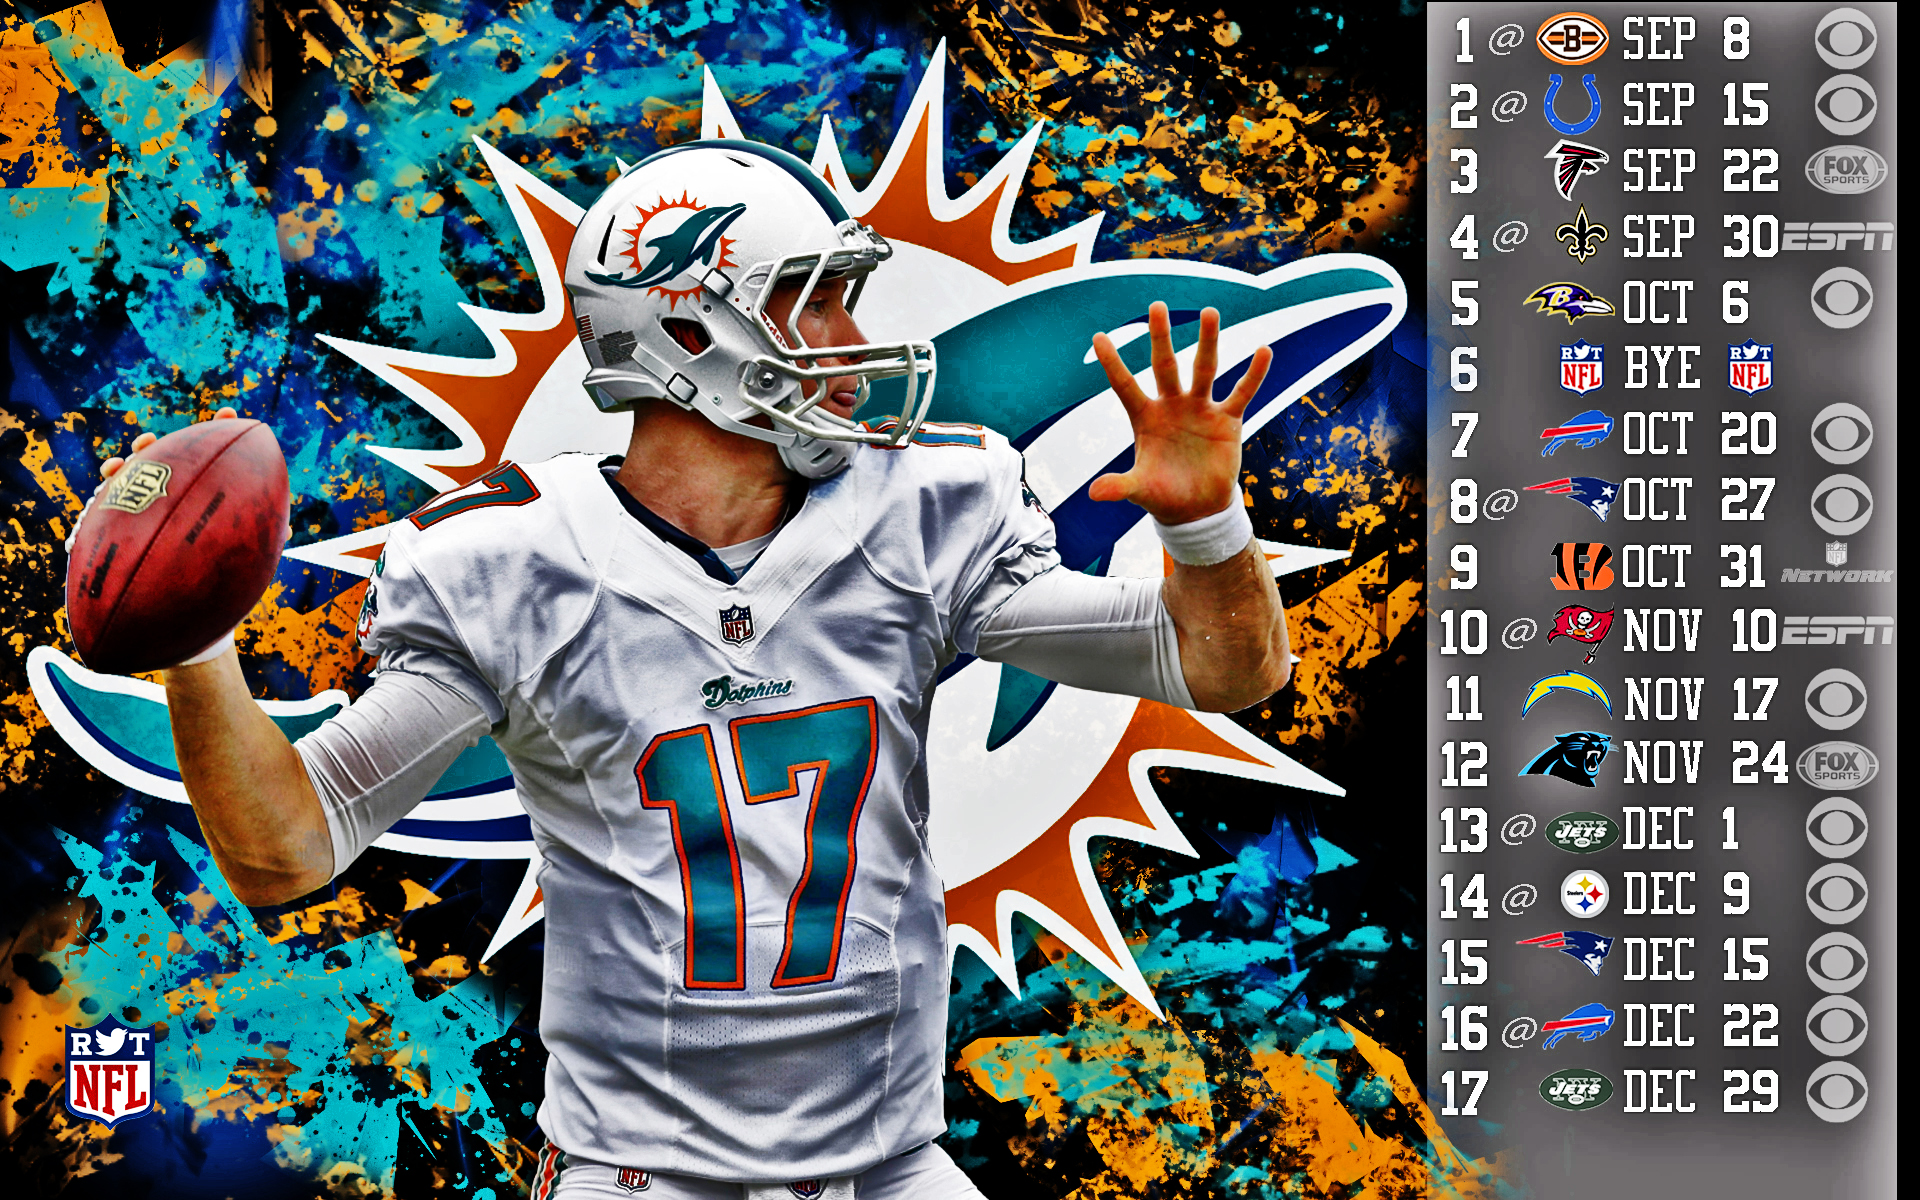 Miami Dolphins Schedule Image And Photo Galleries FameImage